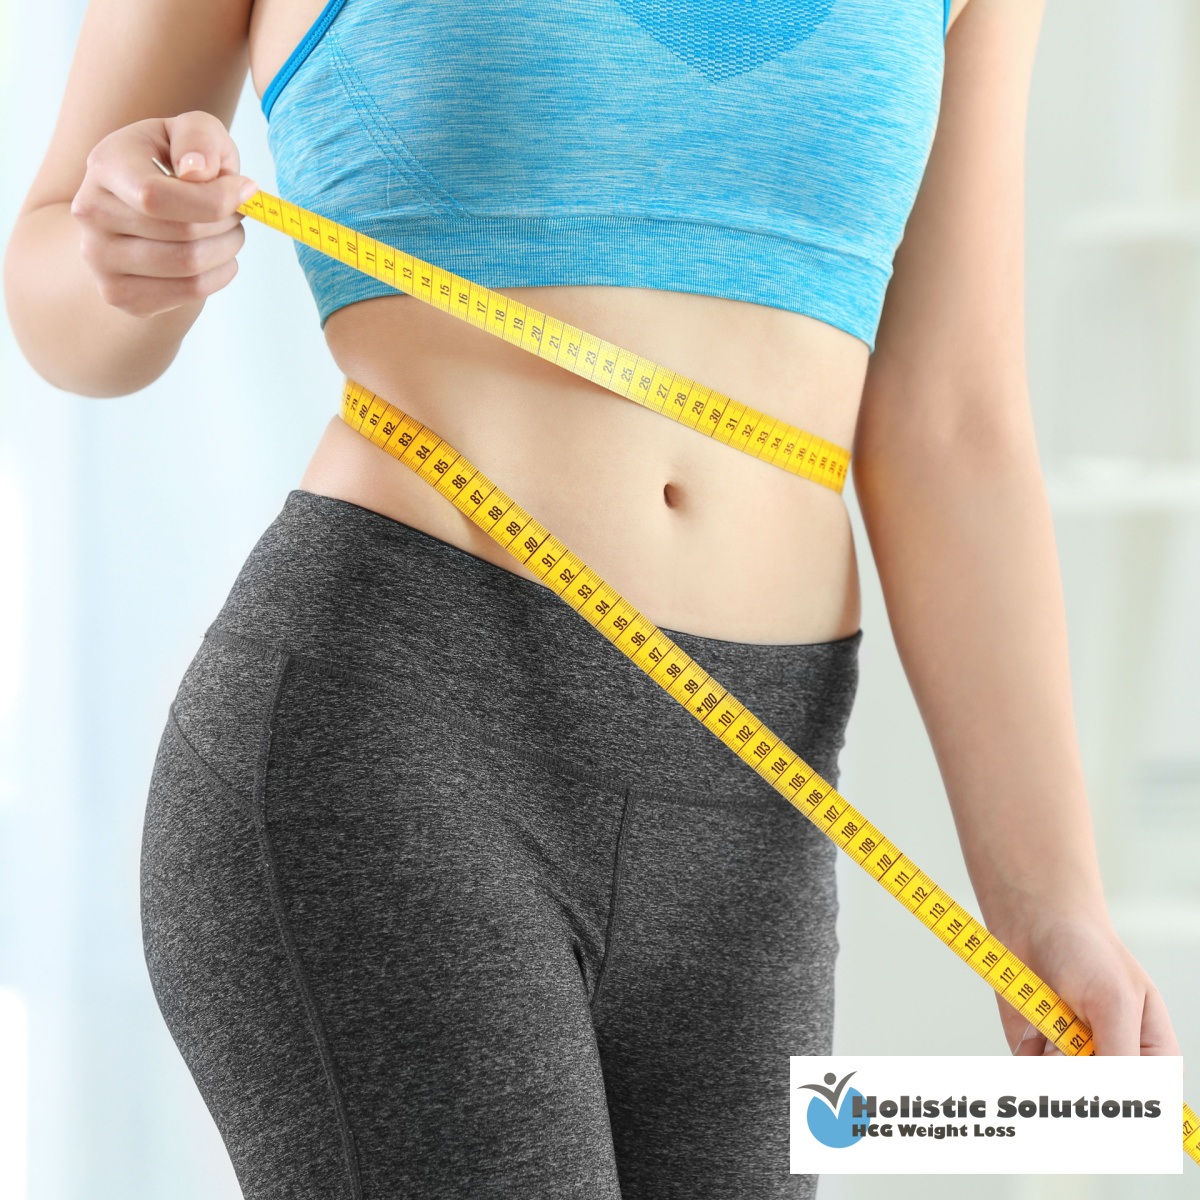 Is HCG Really Good For Fat Loss? Visit A Clinic Near Jurupa Valley To Learn More!